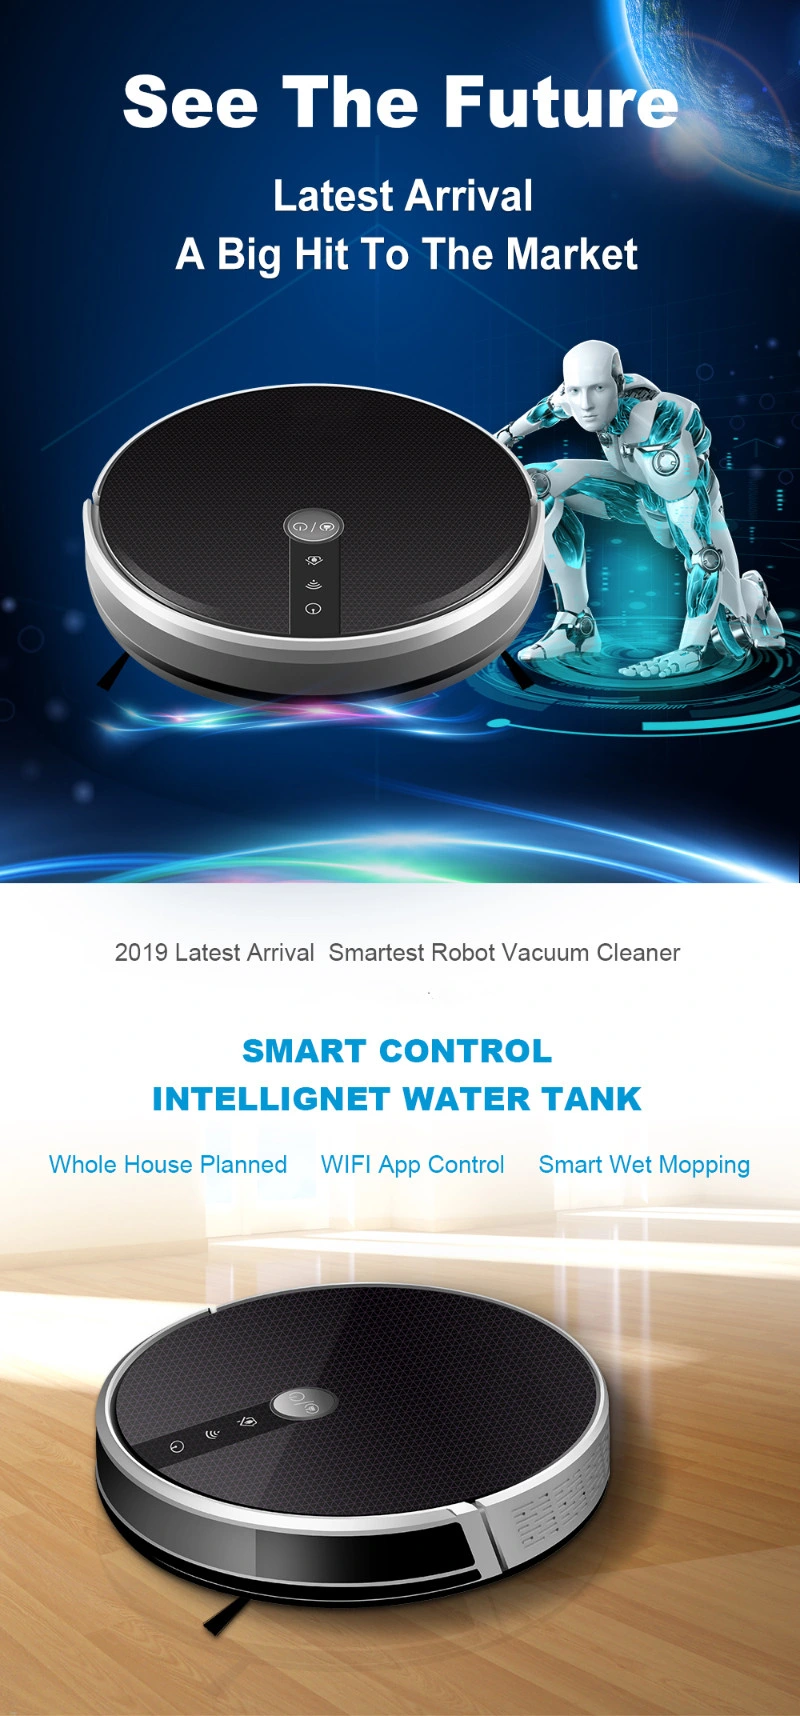 New Robot Vacuum Cleaner Home Application Cleaning Machine Air Filter